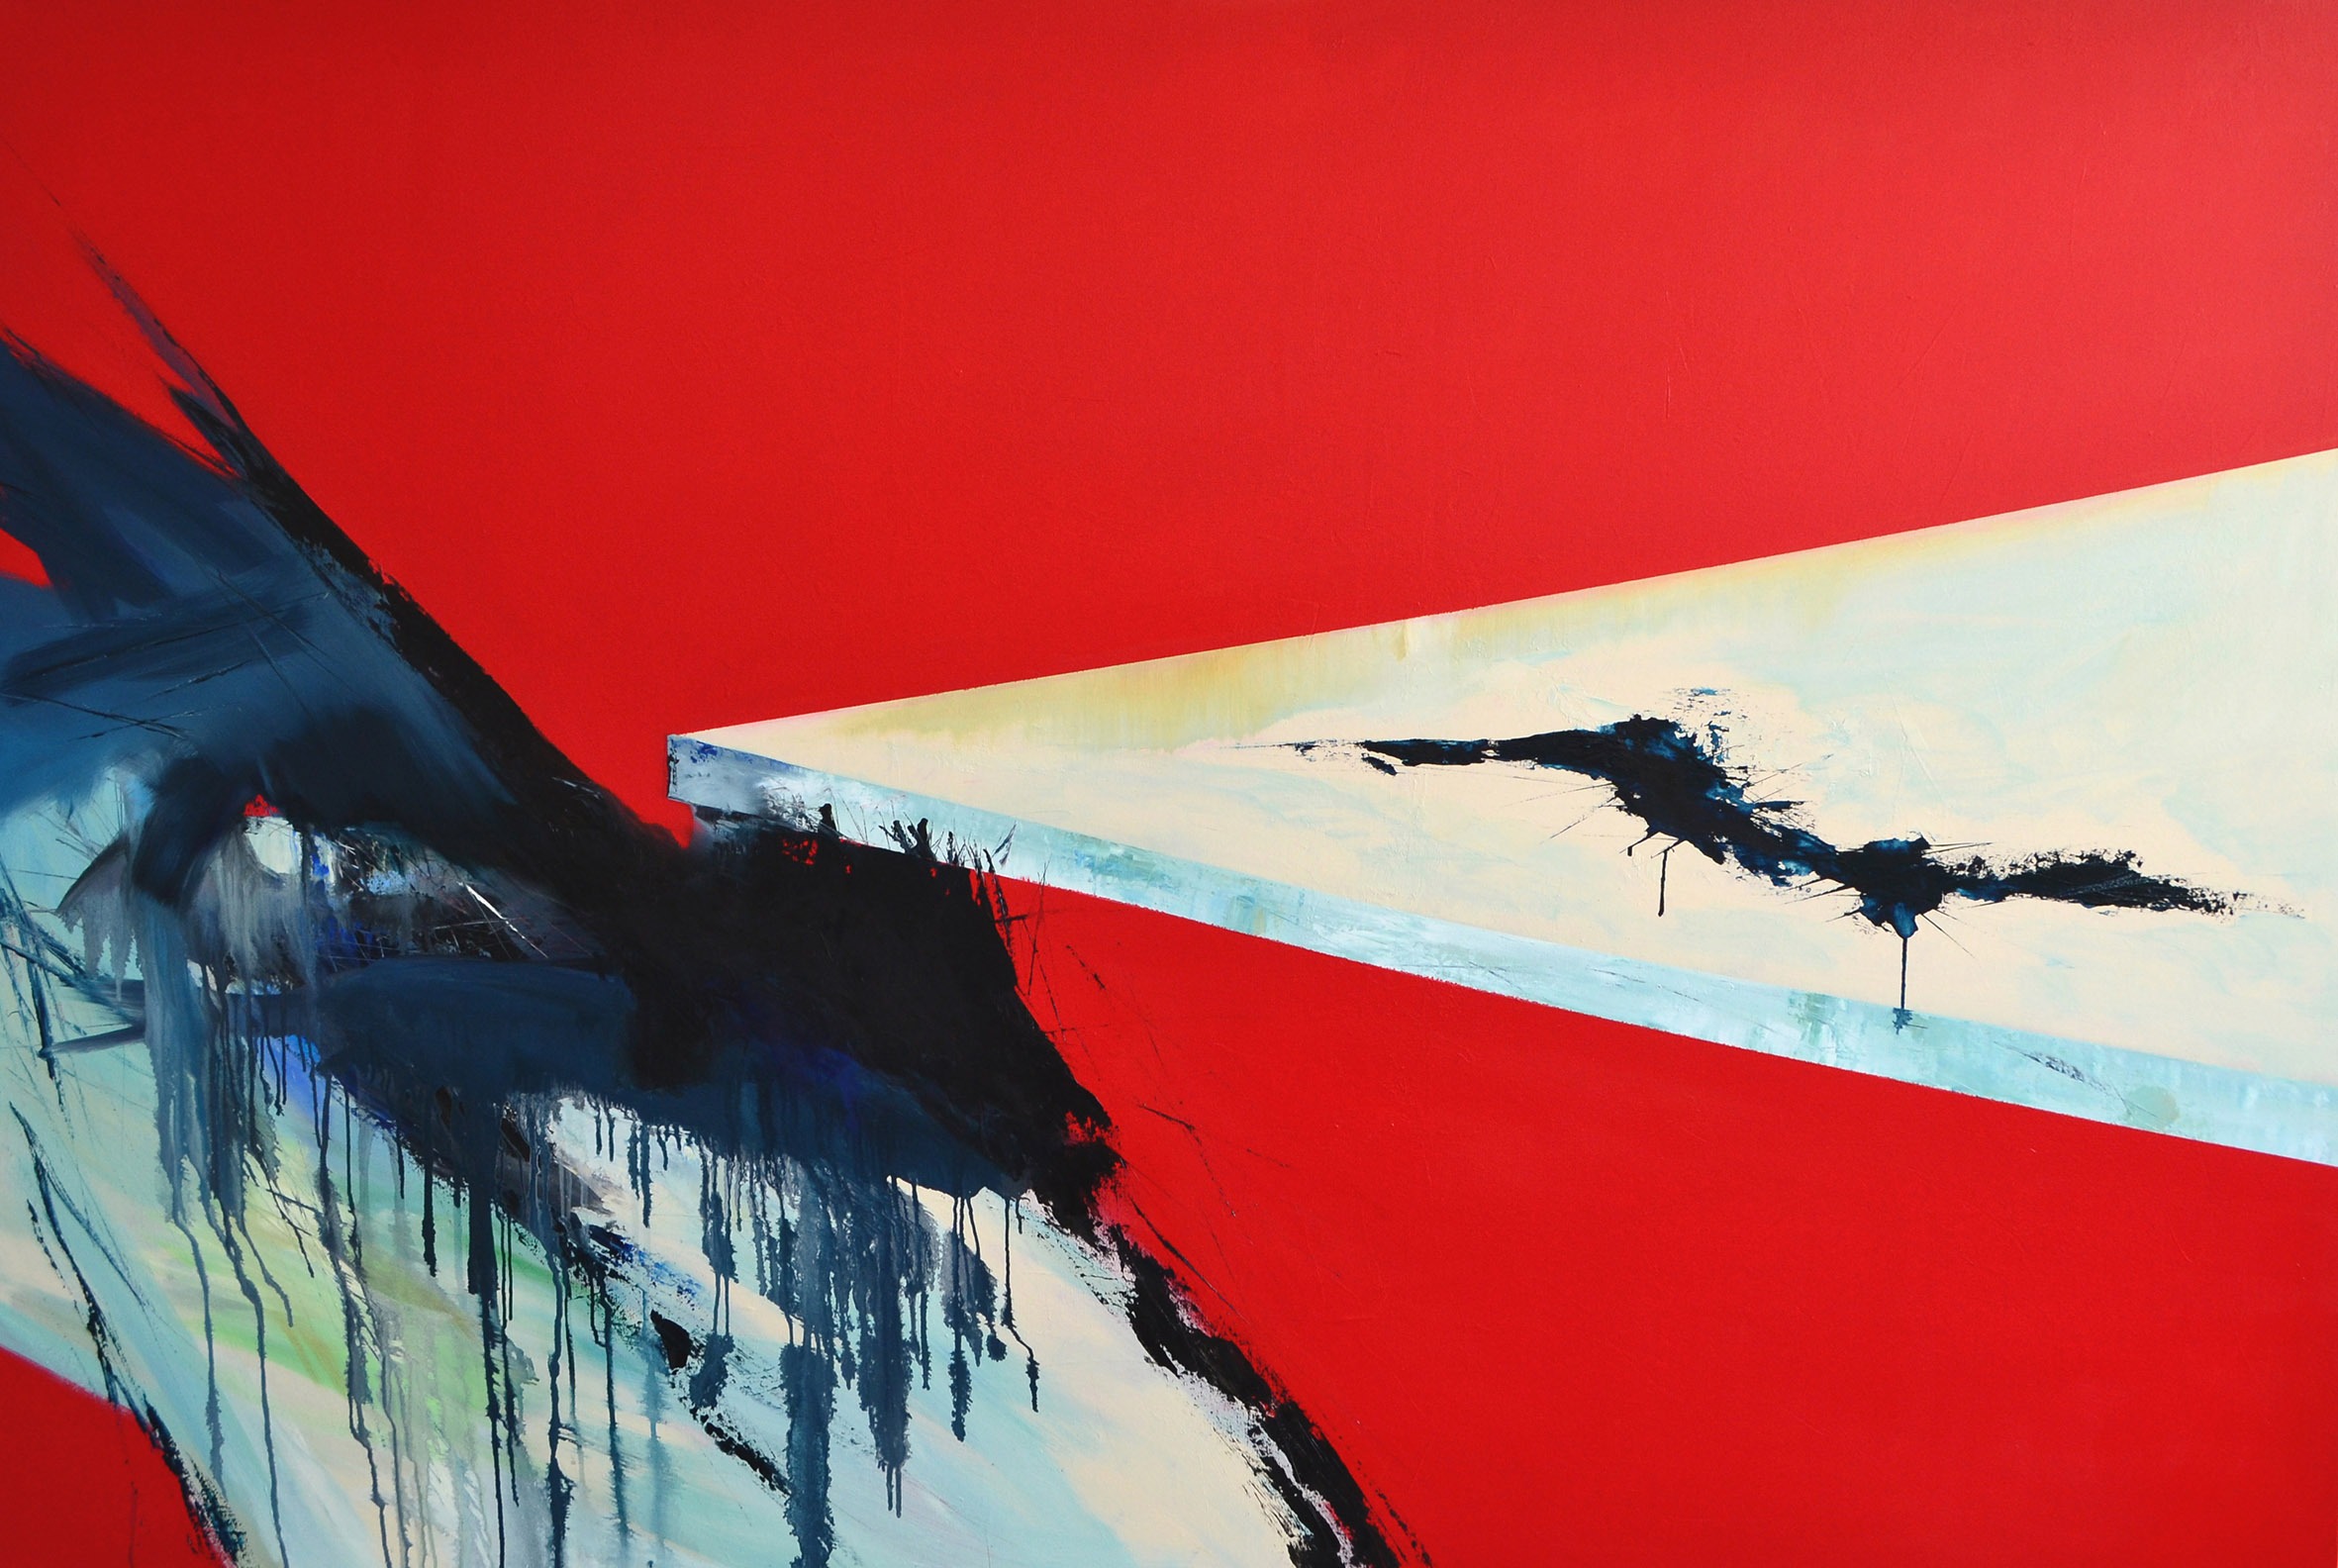 Anne Vandycke, 'Melting Point', Oil on canvas, 48x72inches, vsm